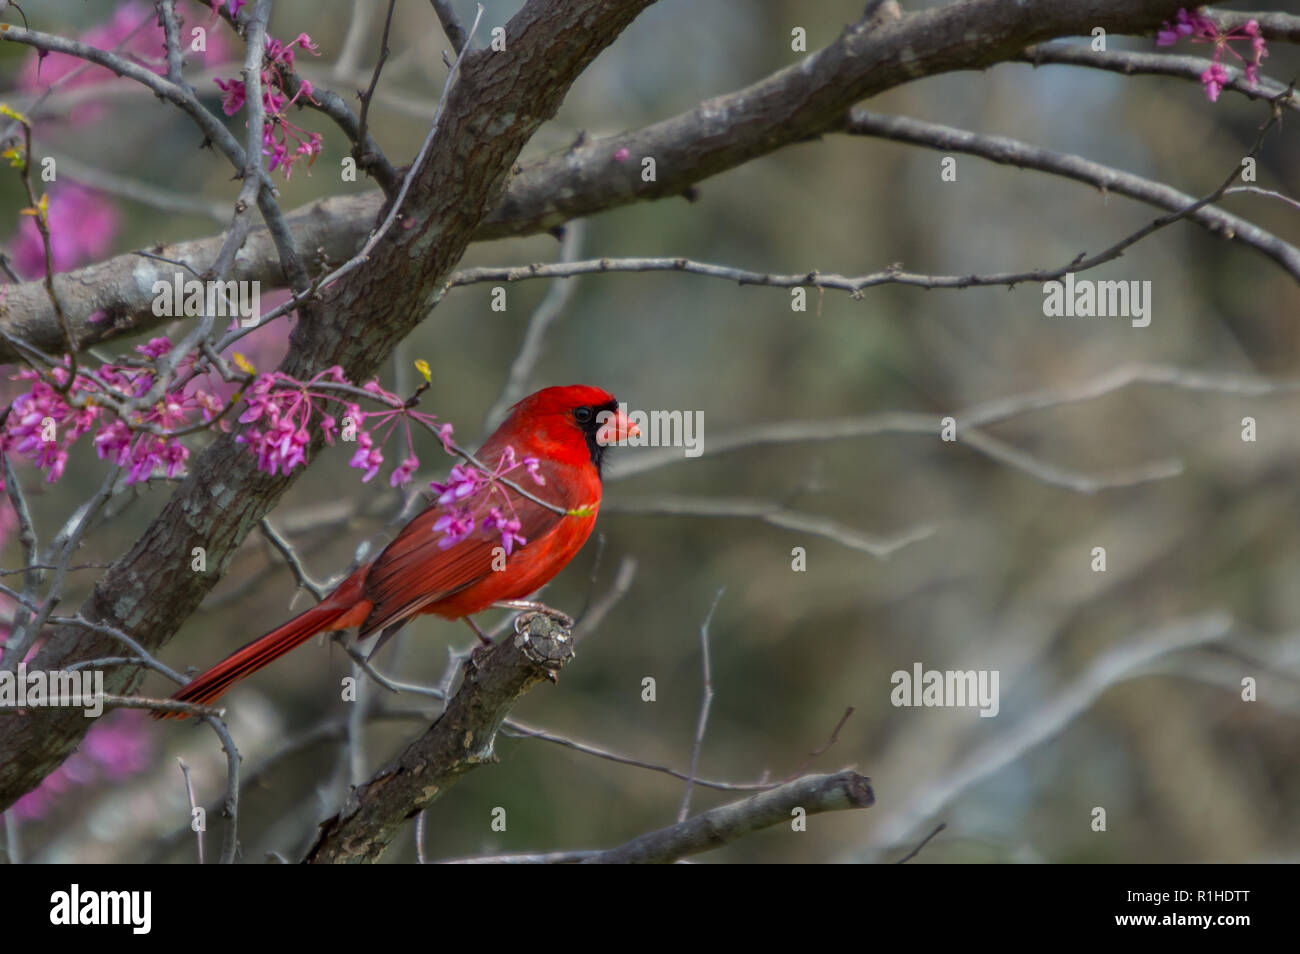 A red male cardinal sits amongst the pinkish purple blooms of a redbud tree at the beginning of spring Stock Photo